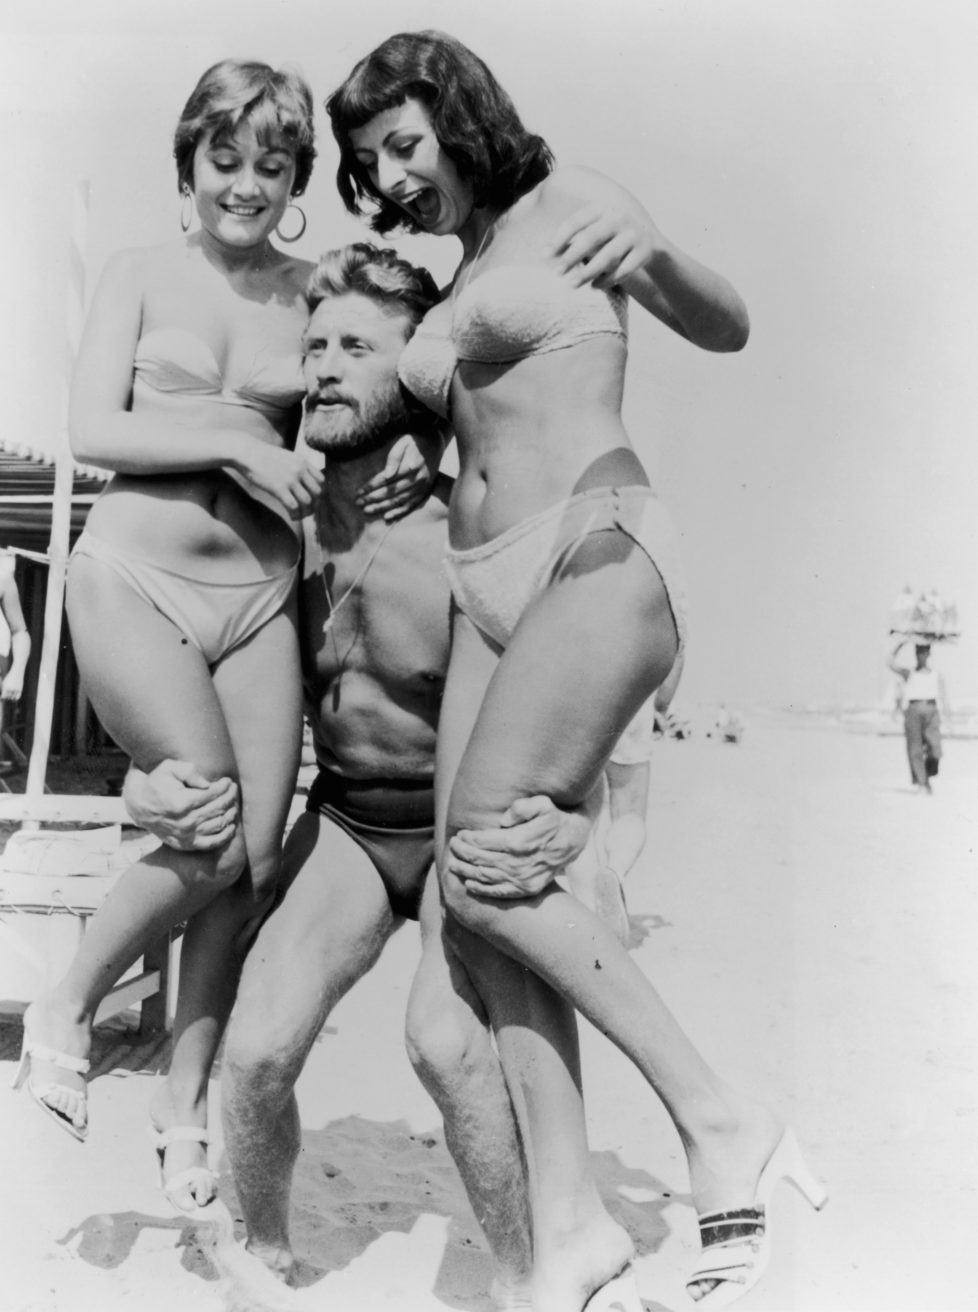 1953: American actor Kirk Douglas, wearing a swimsuit, lifts two women wearing bikinis on a beach during the Venice Film Festival, Italy. (Photo by Hulton Archive/Getty Images)